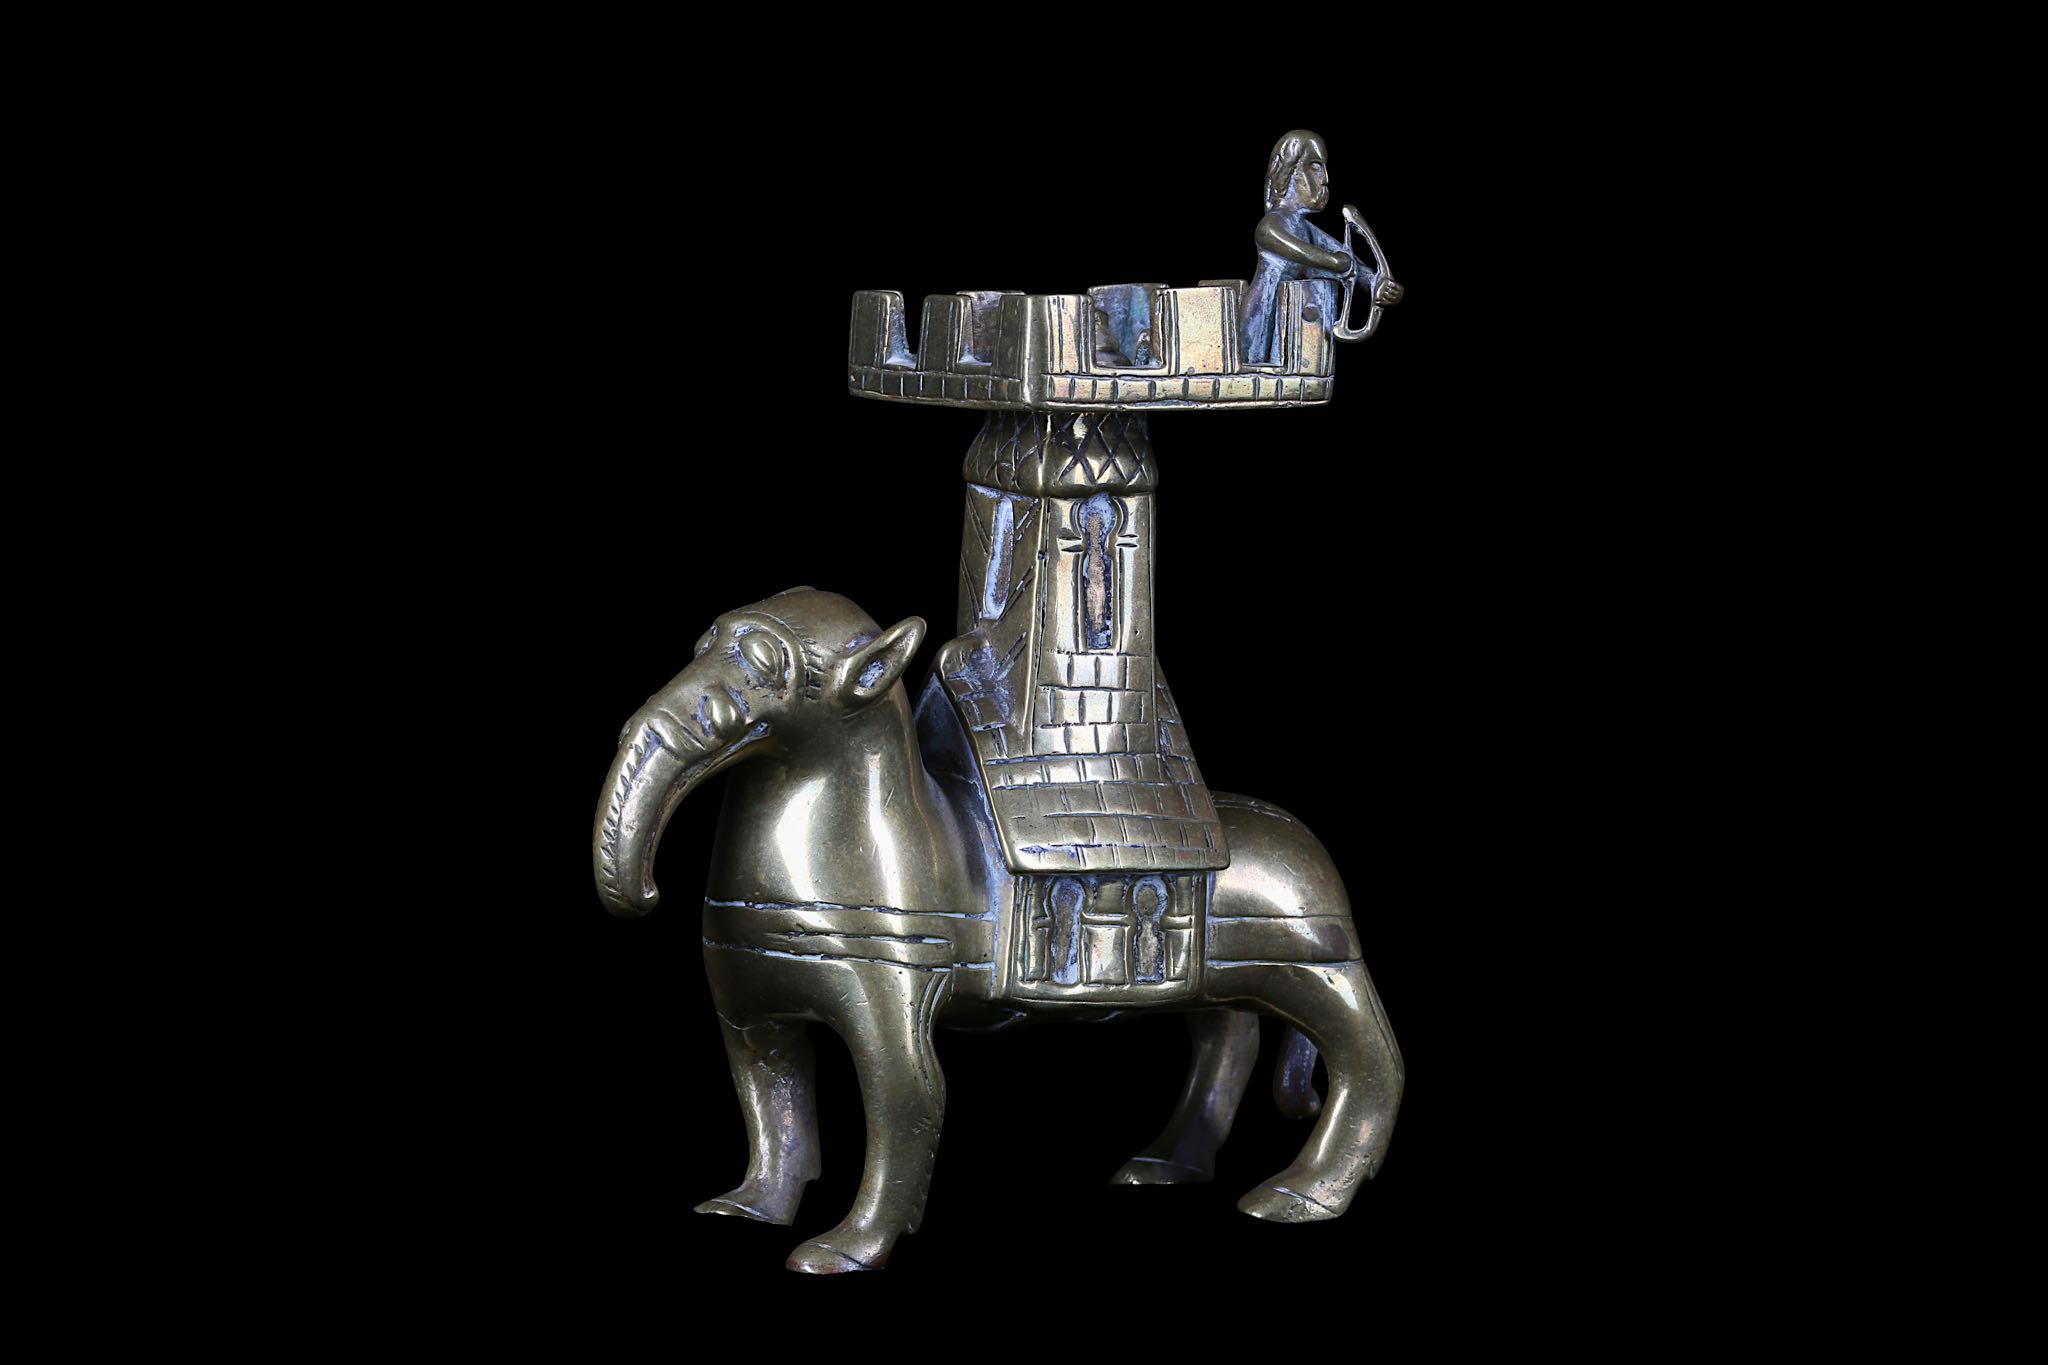 A MAGDEBURG STYLE BRONZE CANDLESTICK IN THE FORM OF AN ELEPHANT AND CASTLE, PROBABLY 19TH CENTURY